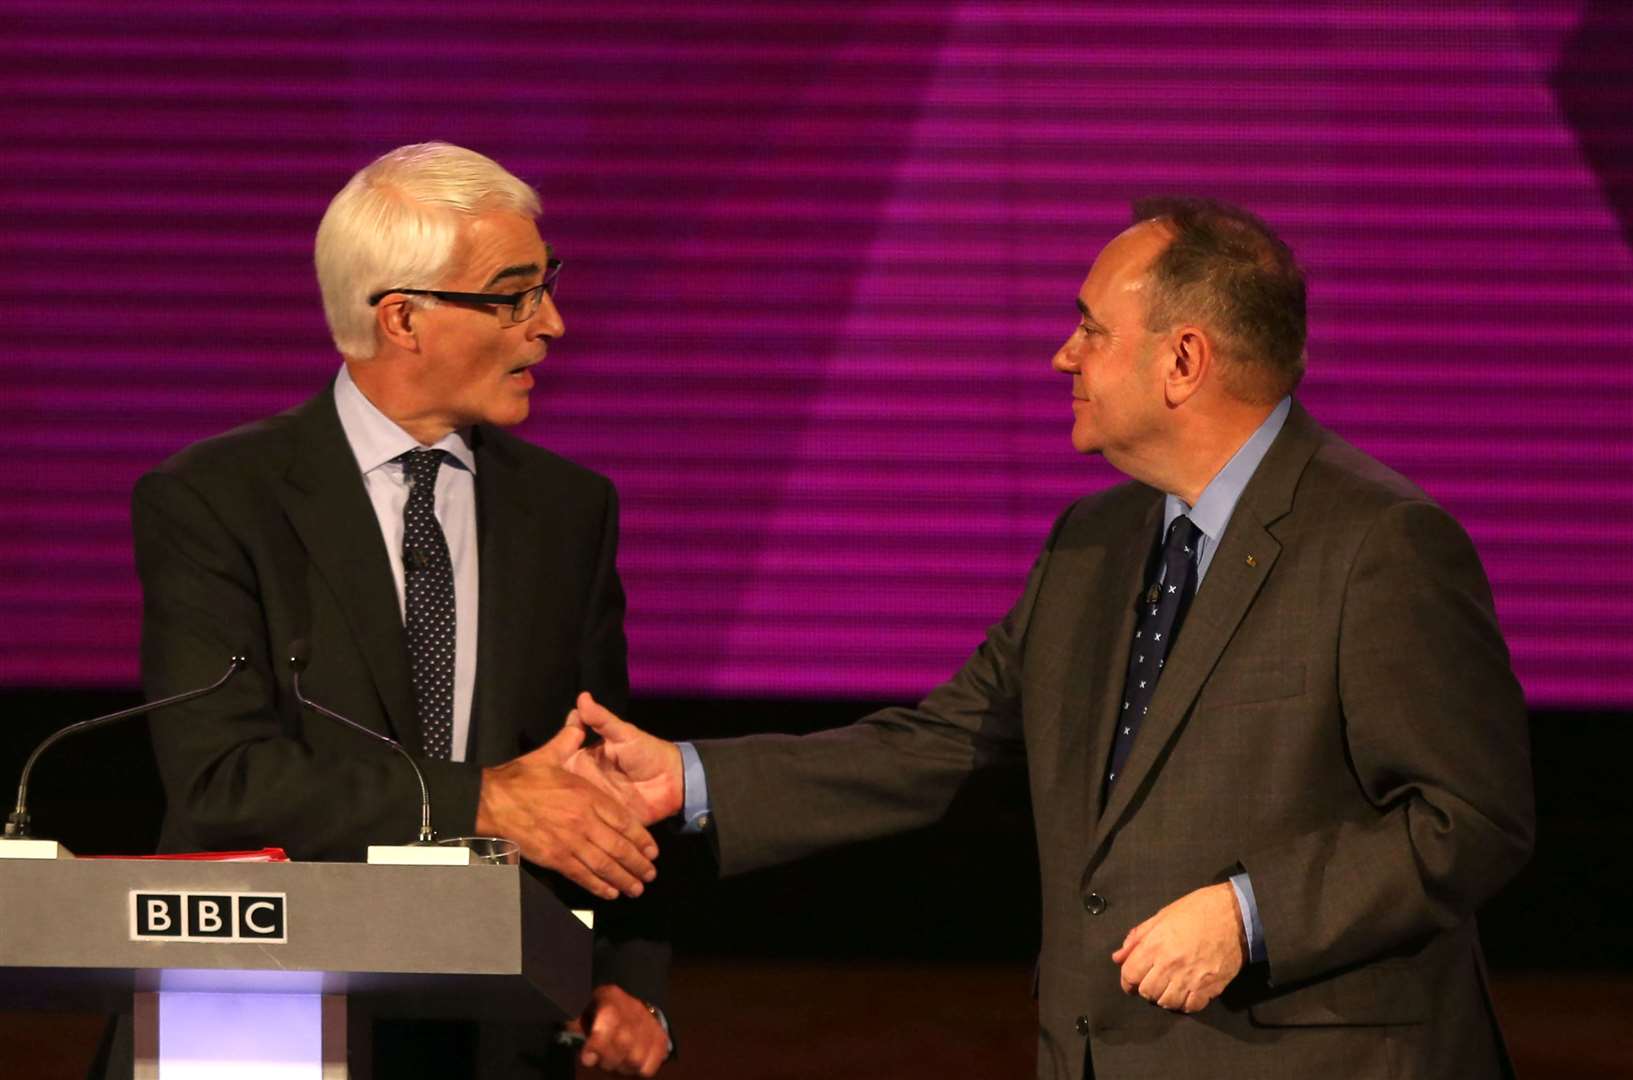 Alistair Darling campaigned against Alex Salmond, the then Scottish first minister, in the run-up to the 2014 independence referendum (PA)